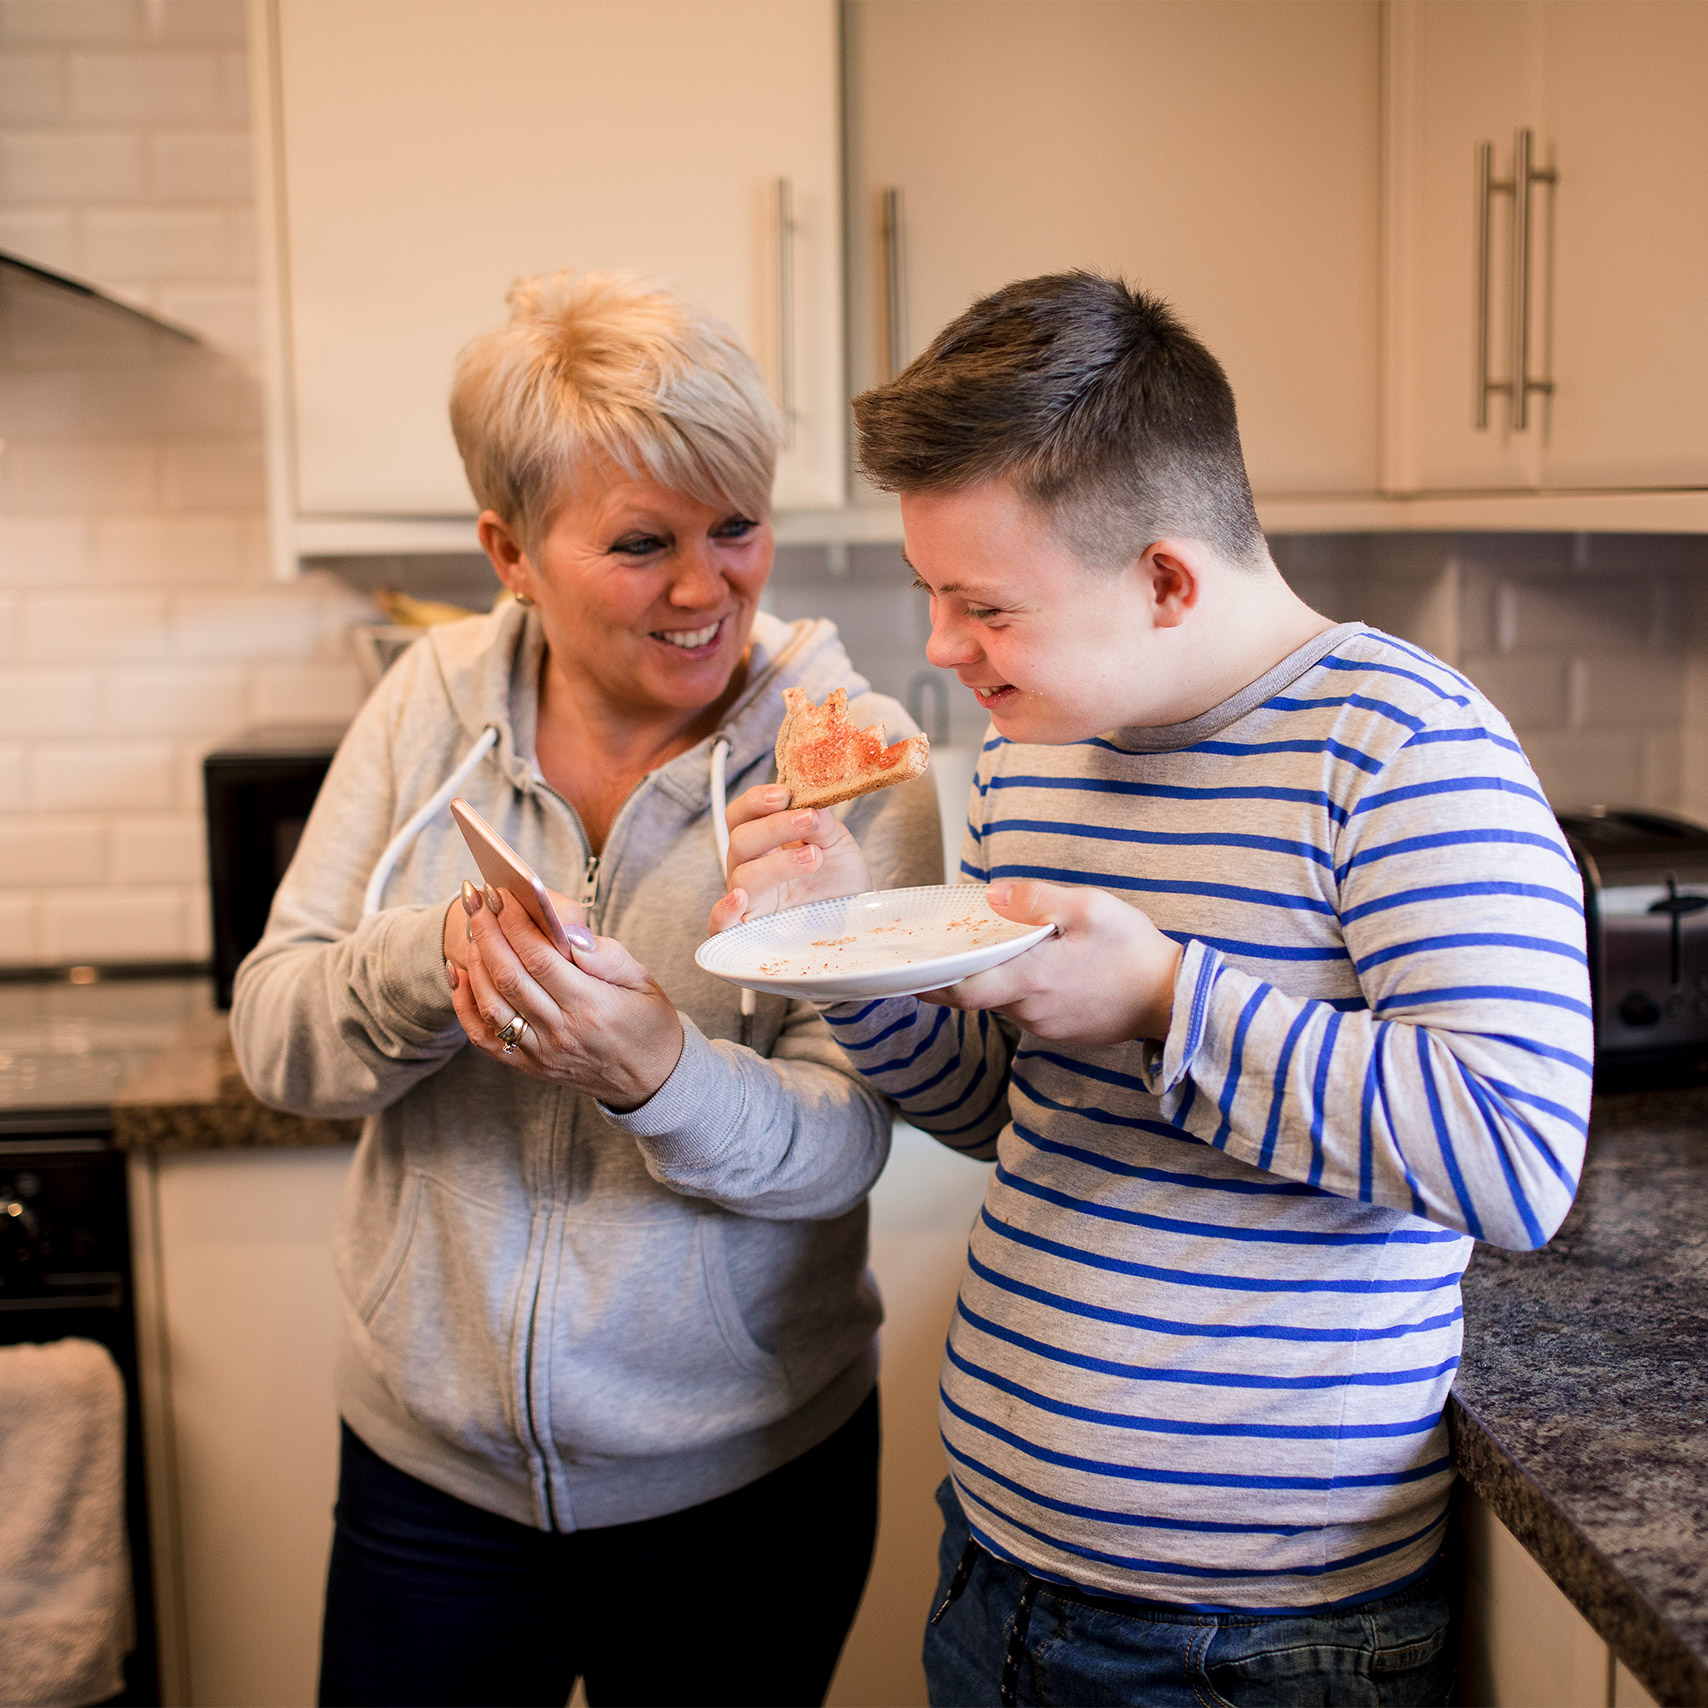 Mother smiles at teenage son as he eats toast